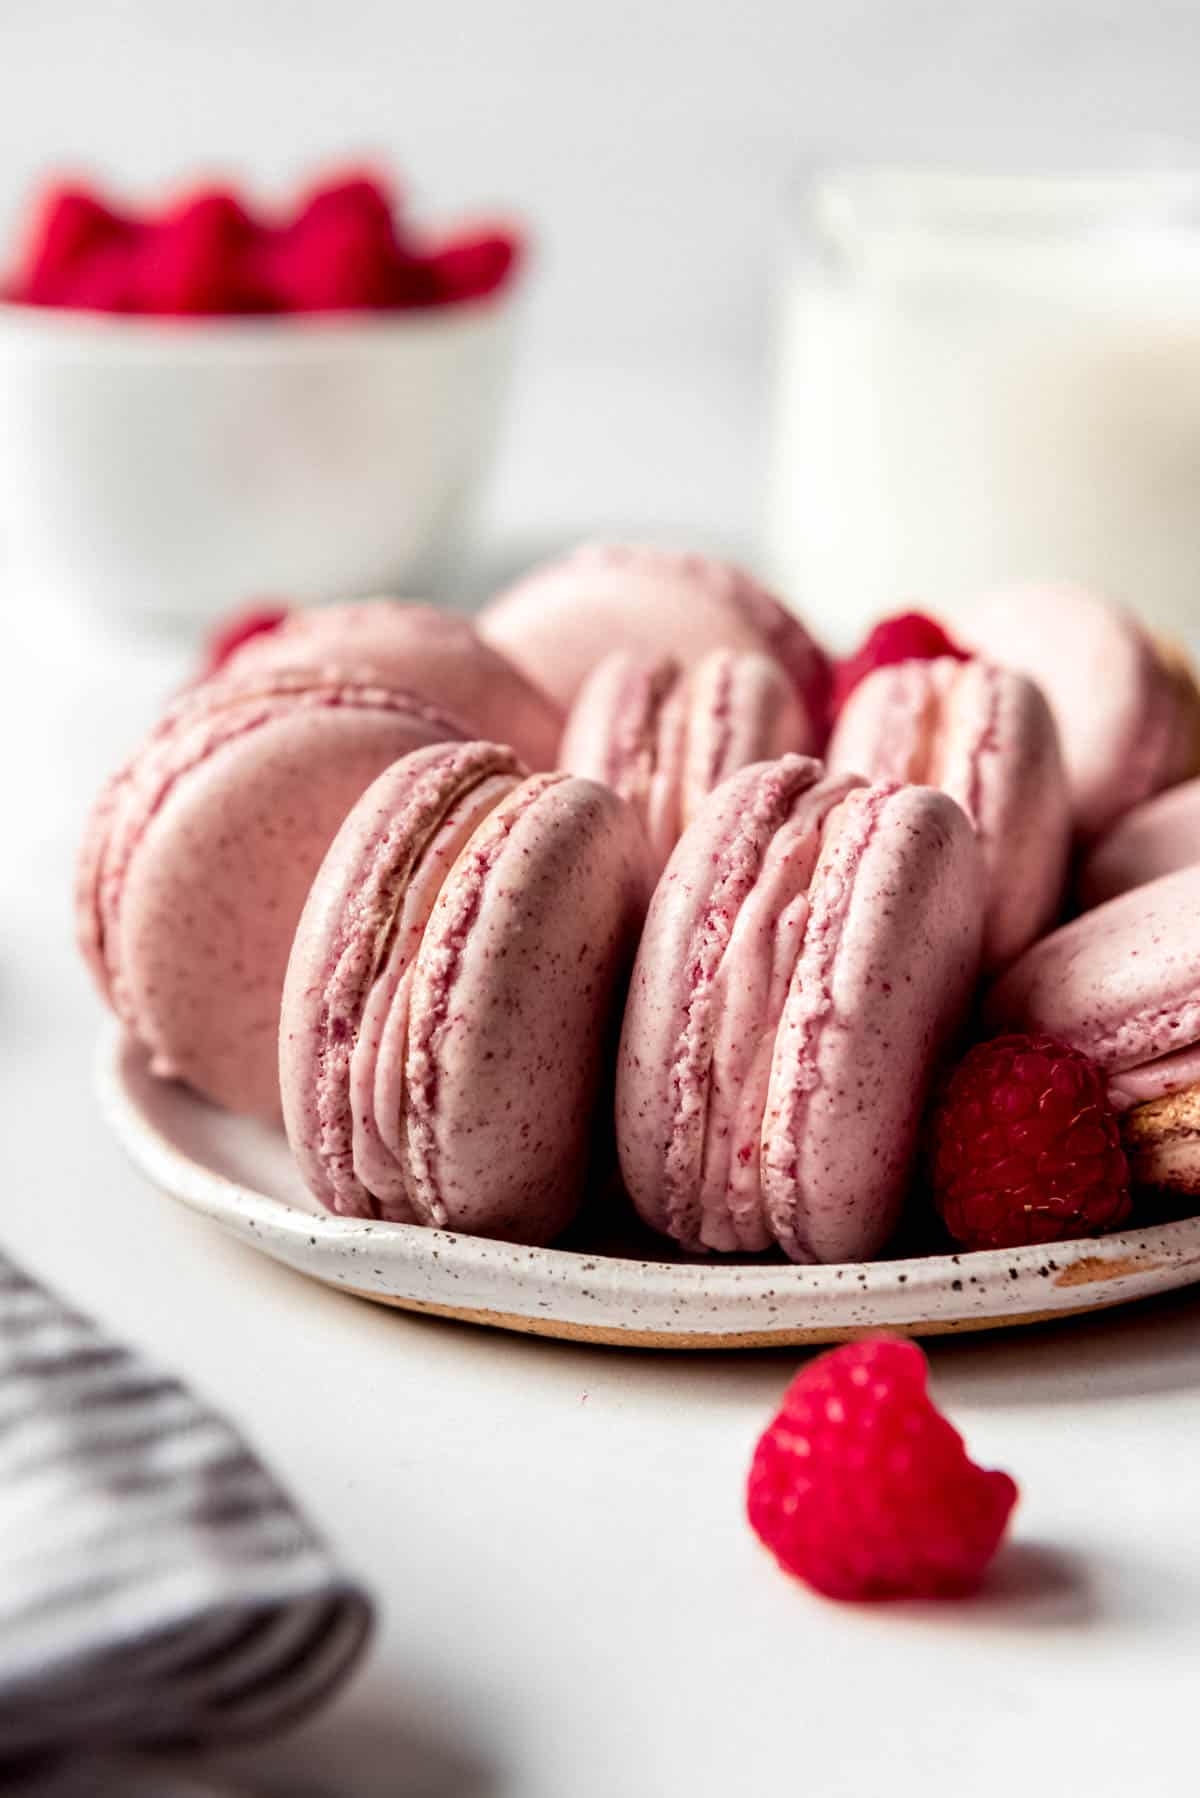 An image of buttercream-filled macarons.